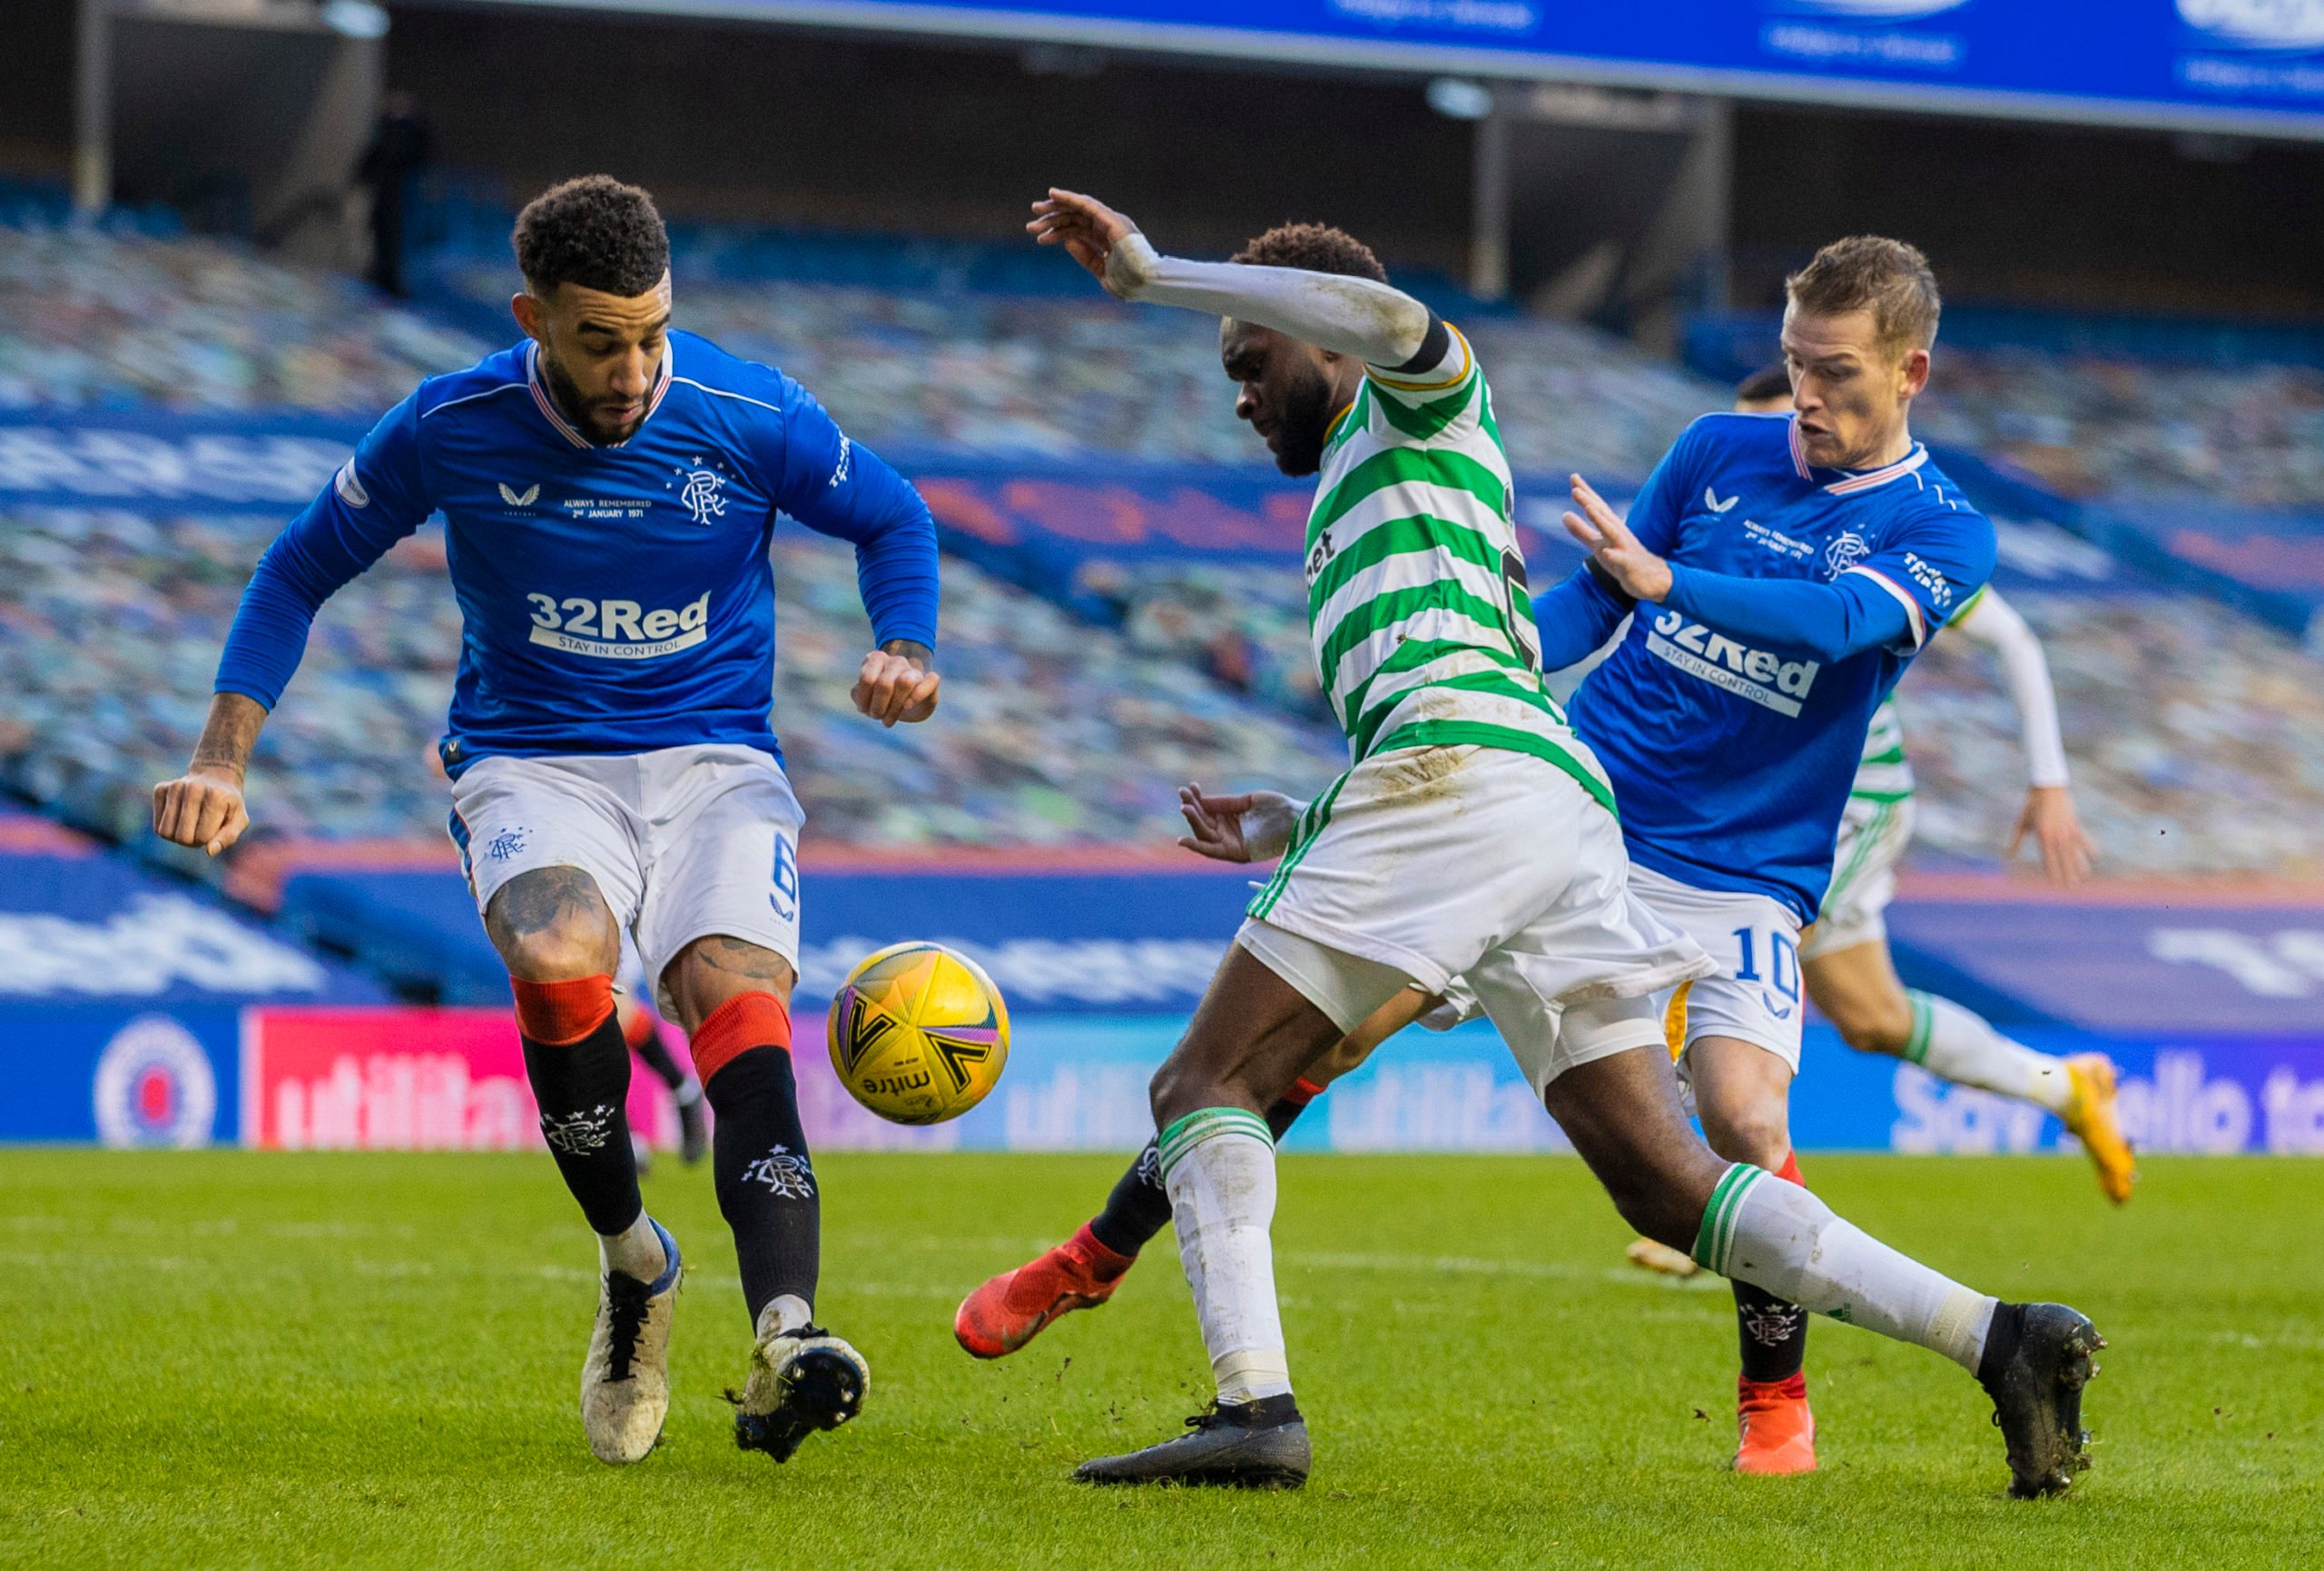 Odsonne Edouard urged to produce "something extraordinary" for Celtic in Scottish Cup Glasgow derby